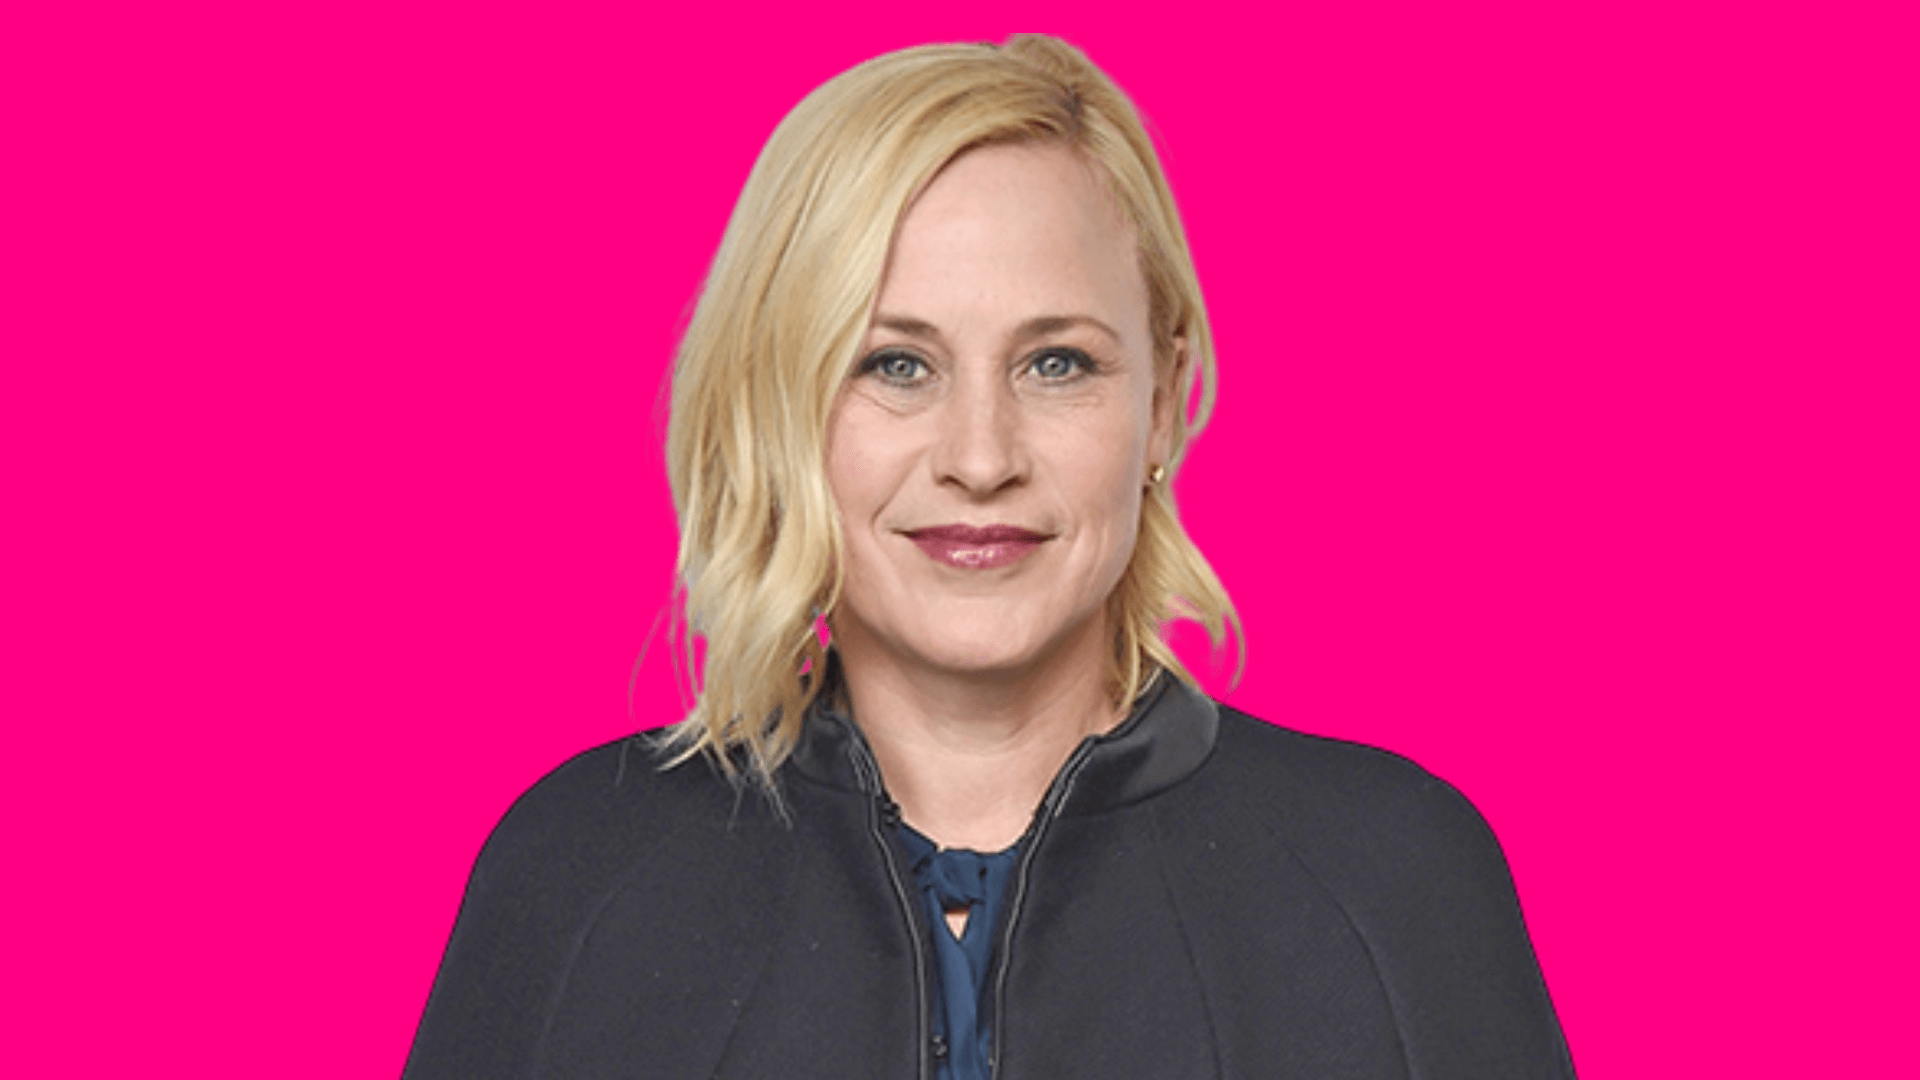 Patricia Arquette Biography, Wiki, Height, Weight, Age, Husband, Boyfriend, Family, Net Worth, Career & Many More